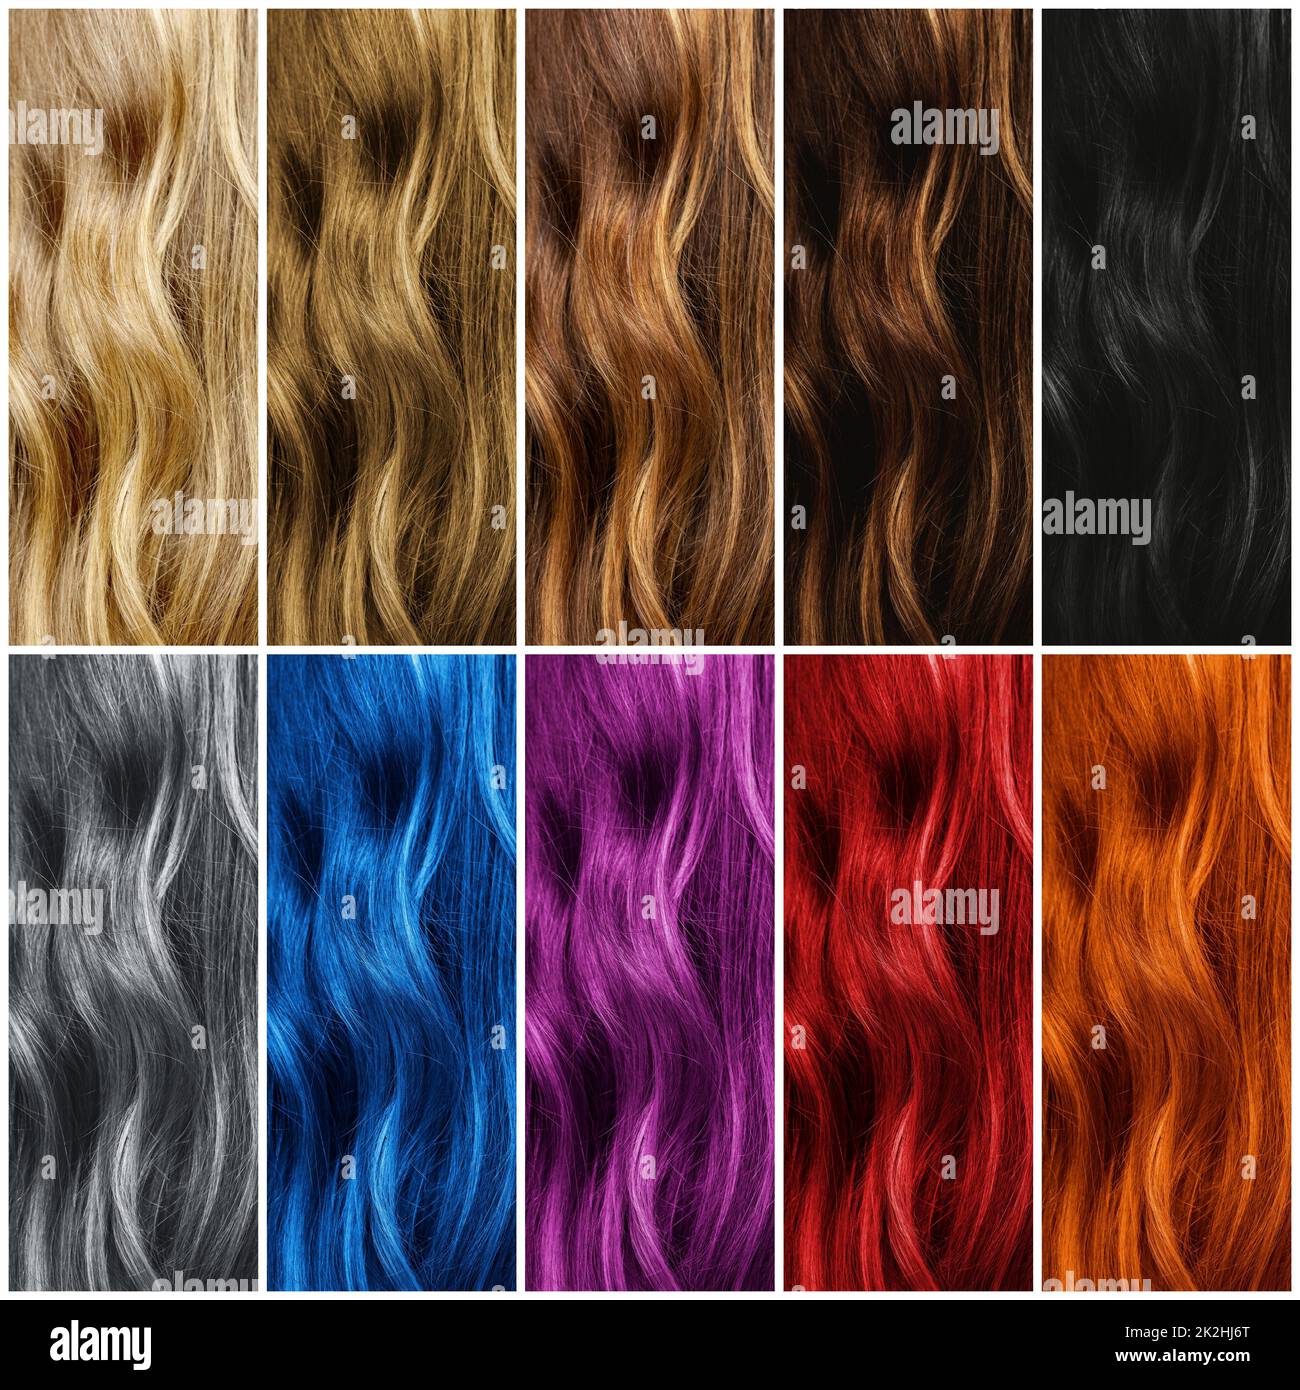 Set of different hair color samples Stock Photo